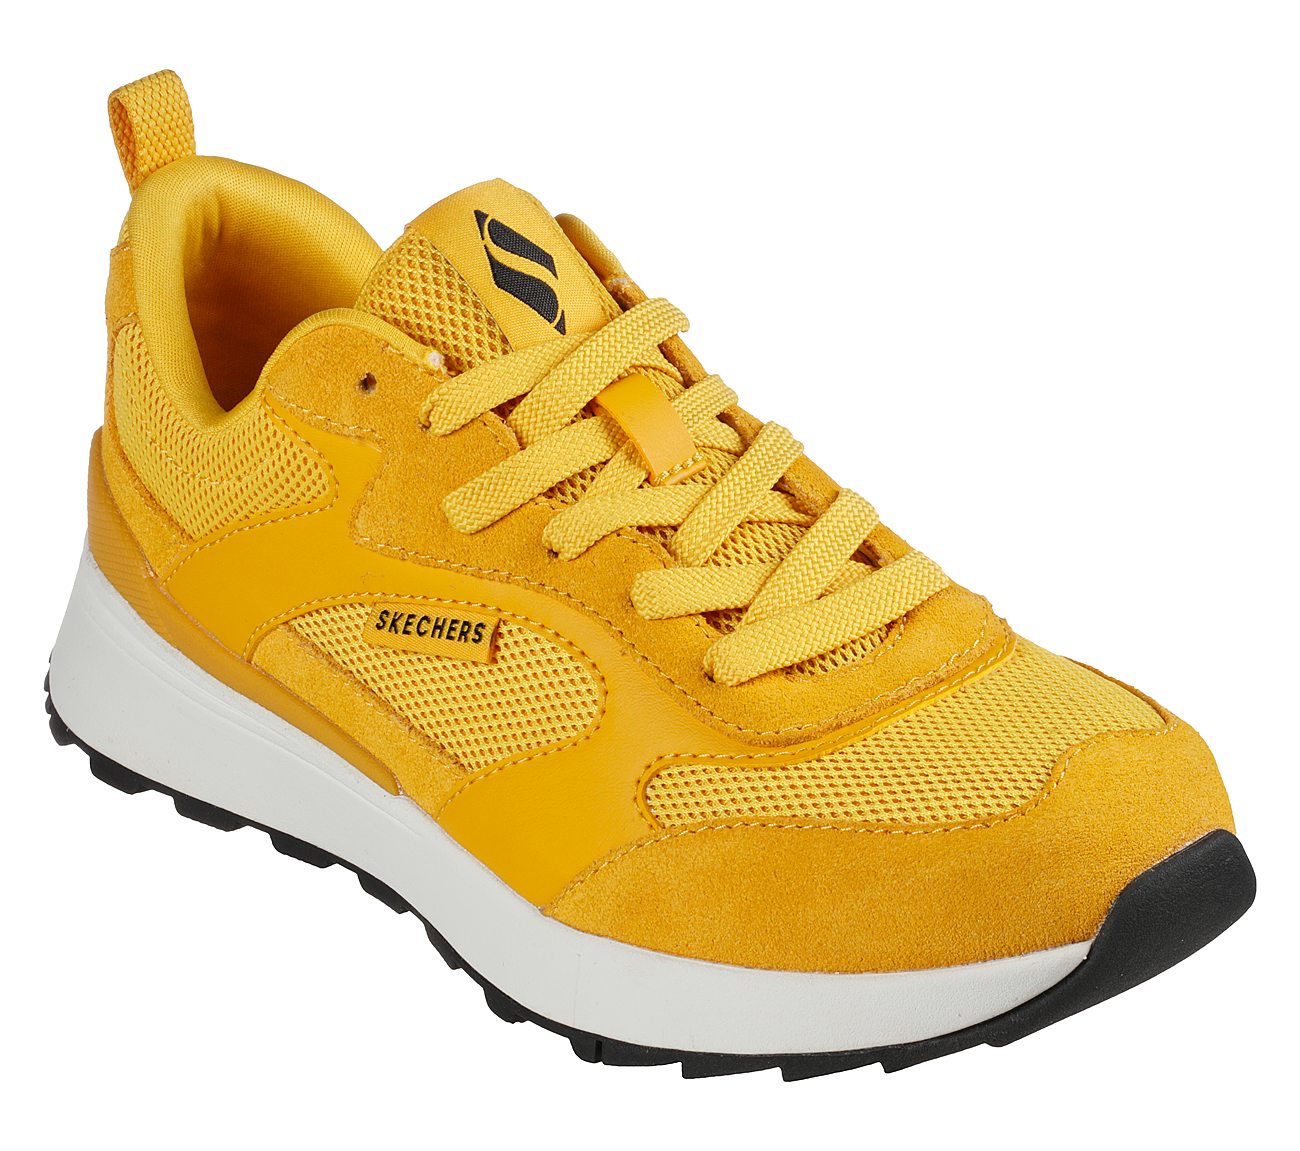 SUNNY STREET - PRIMARY'S, YELLOW Footwear Lateral View